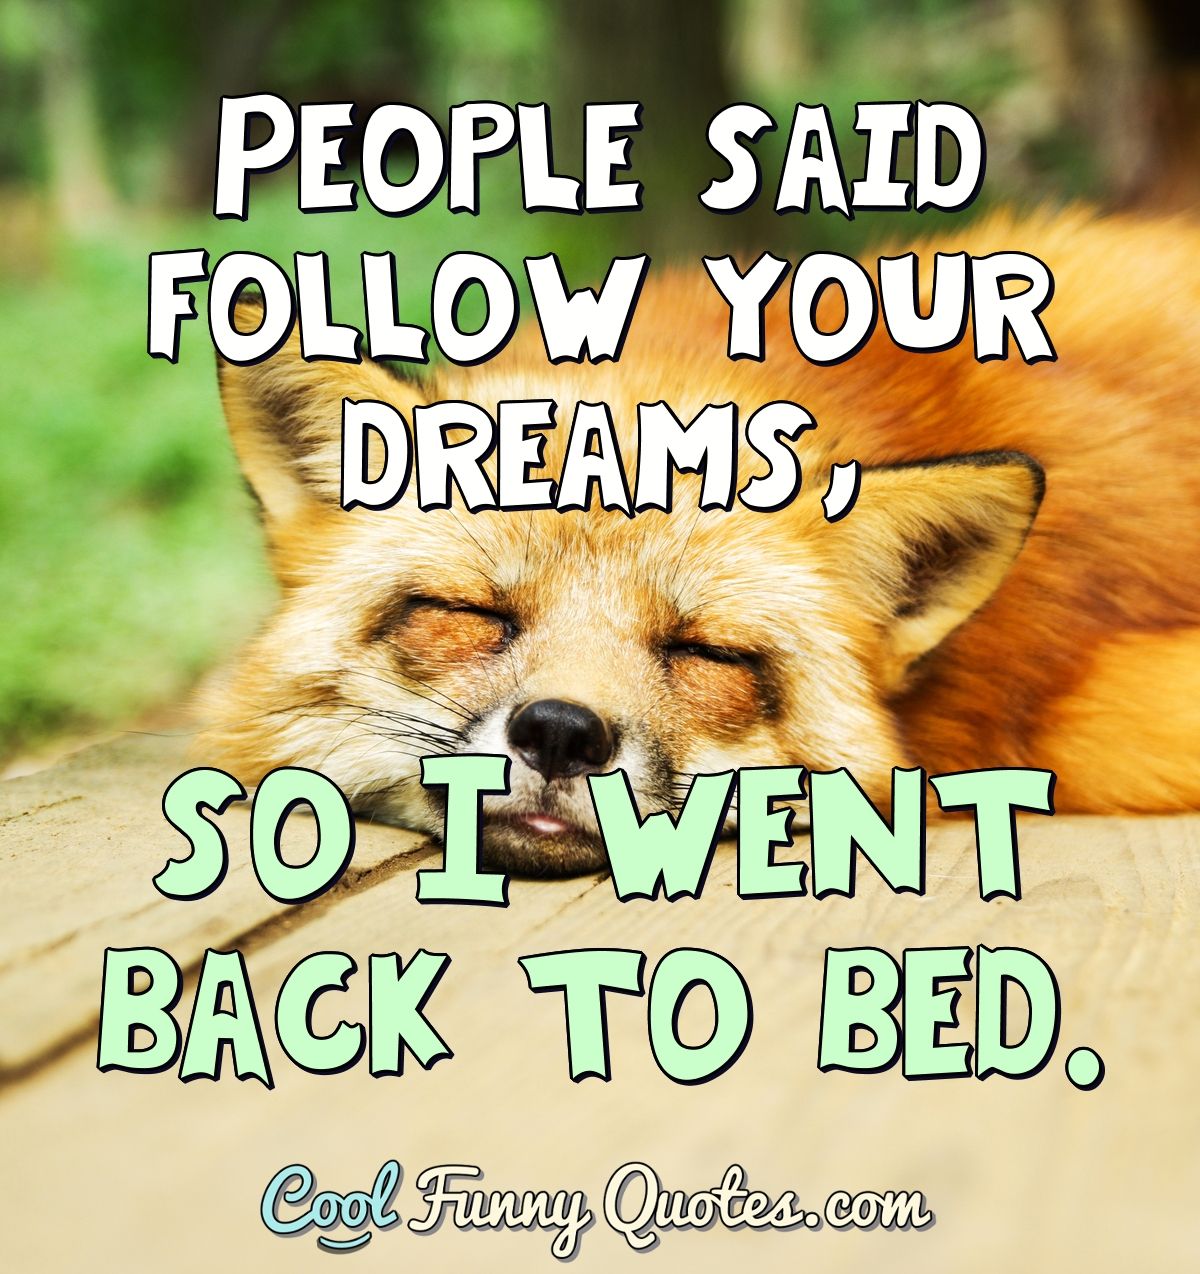 People said follow your dreams, so I went back to bed.